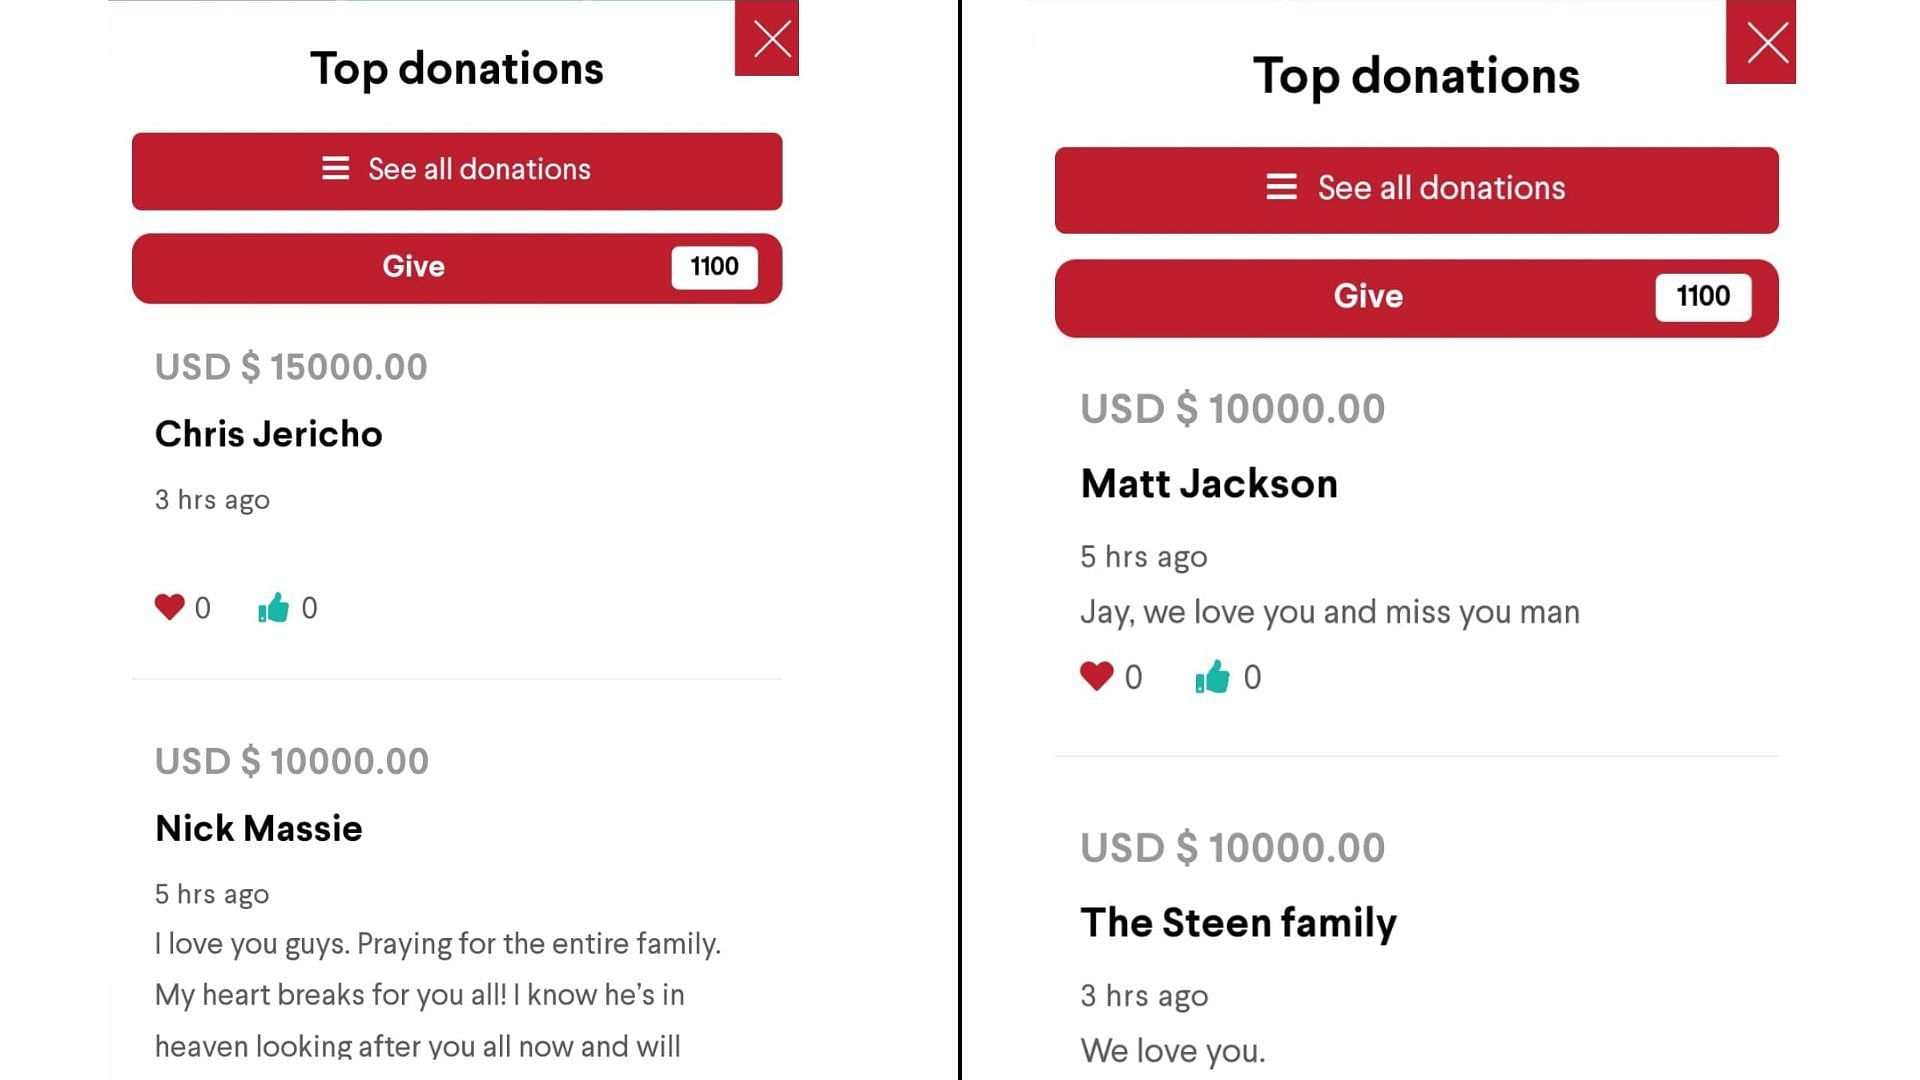 Chris Jericho donated $15000, The Young Bucks and Kevin Owens donated $10000 each